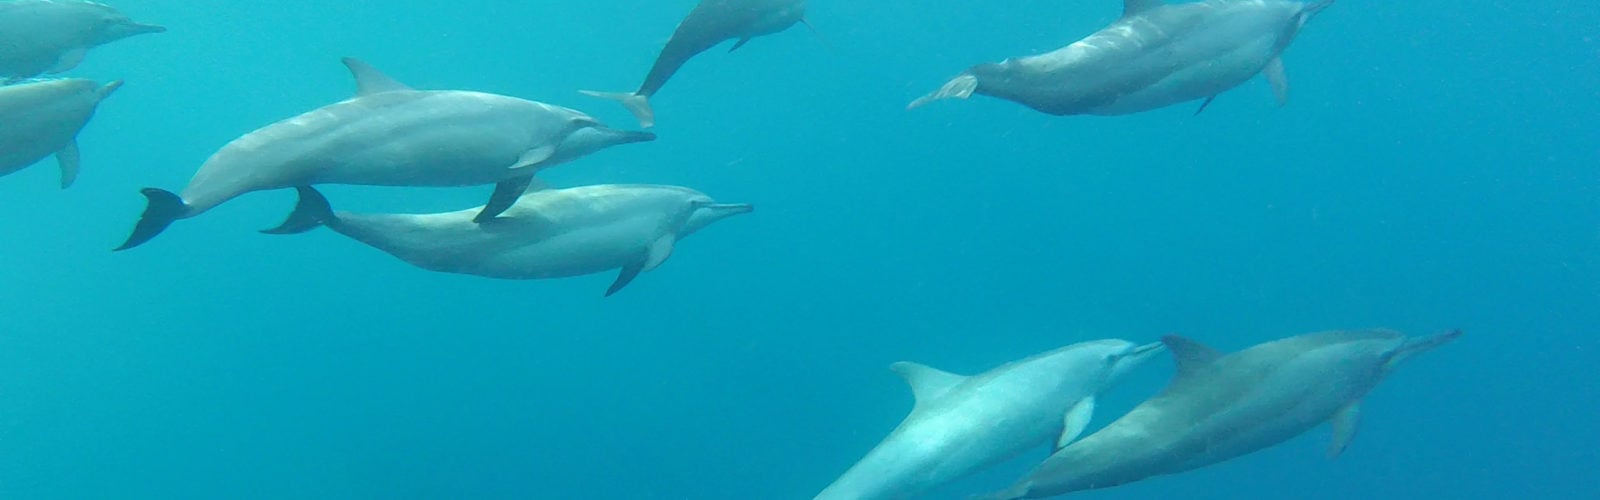 papua-new-guinea-dolphins